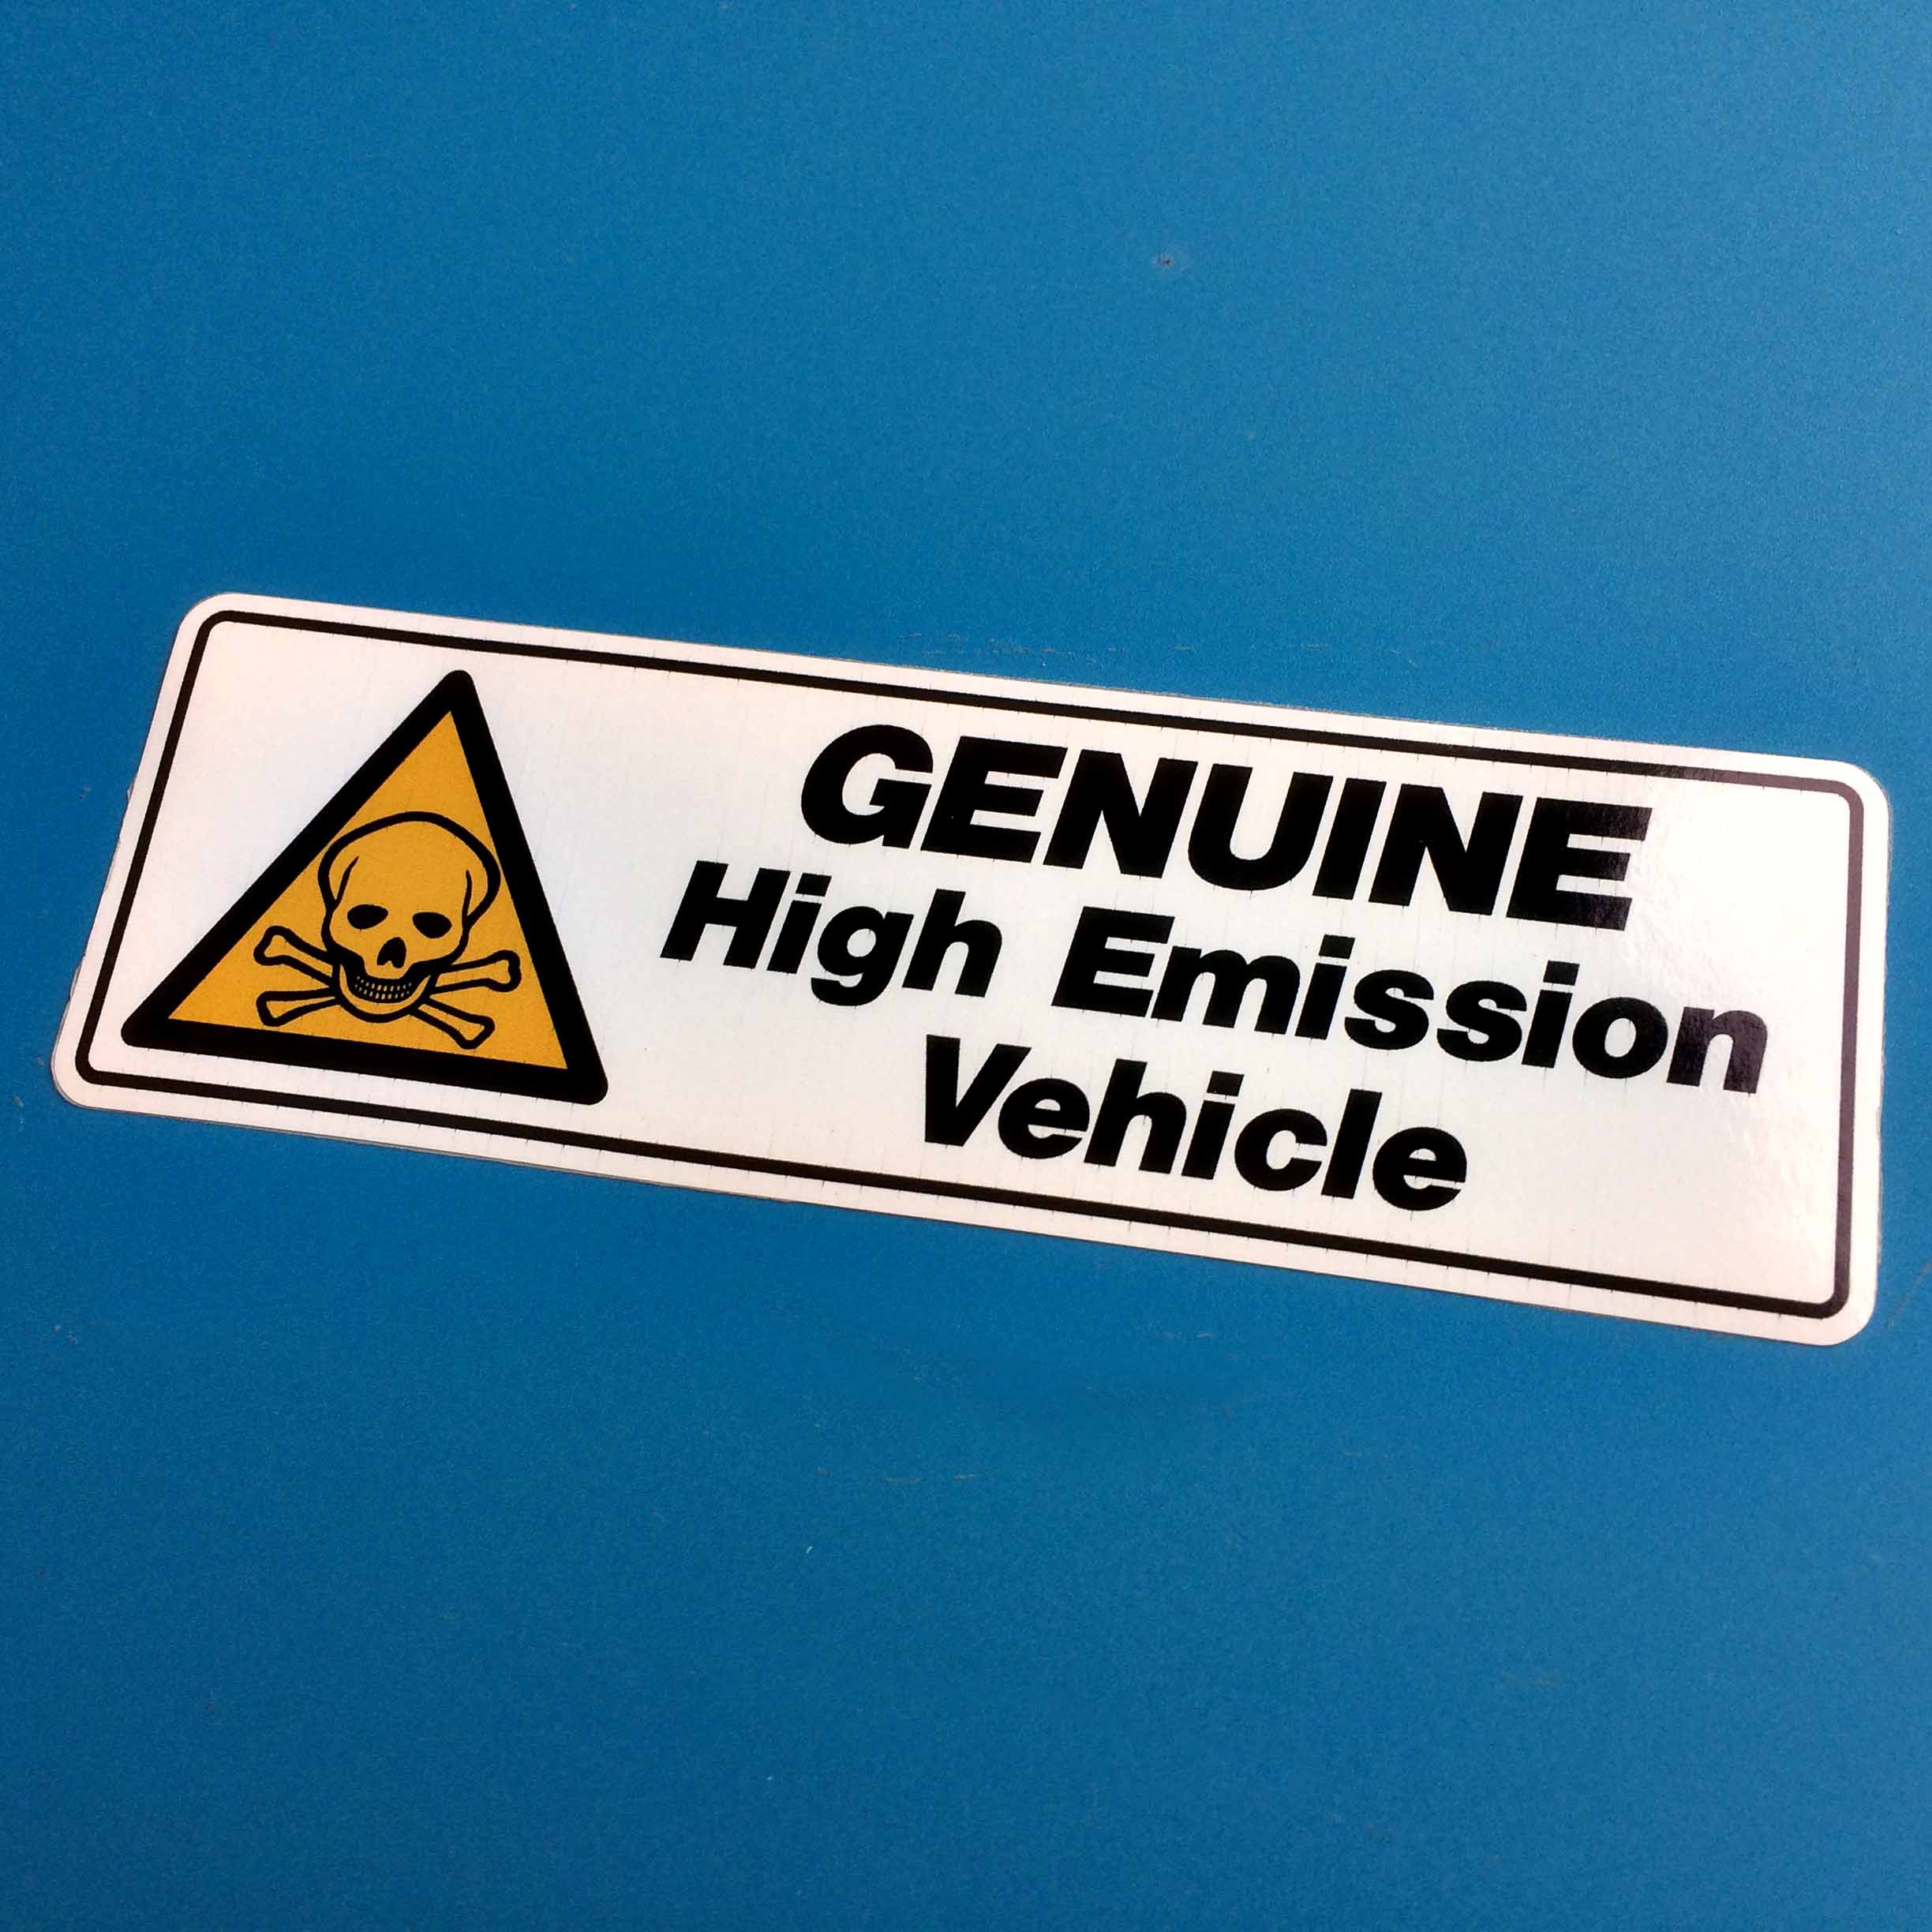 GENUINE HIGH EMISSION STICKER. Genuine High Emission Vehicle in black lettering on a white background bordered in black next to a skull and crossbones hazard triangle in yellow and black.